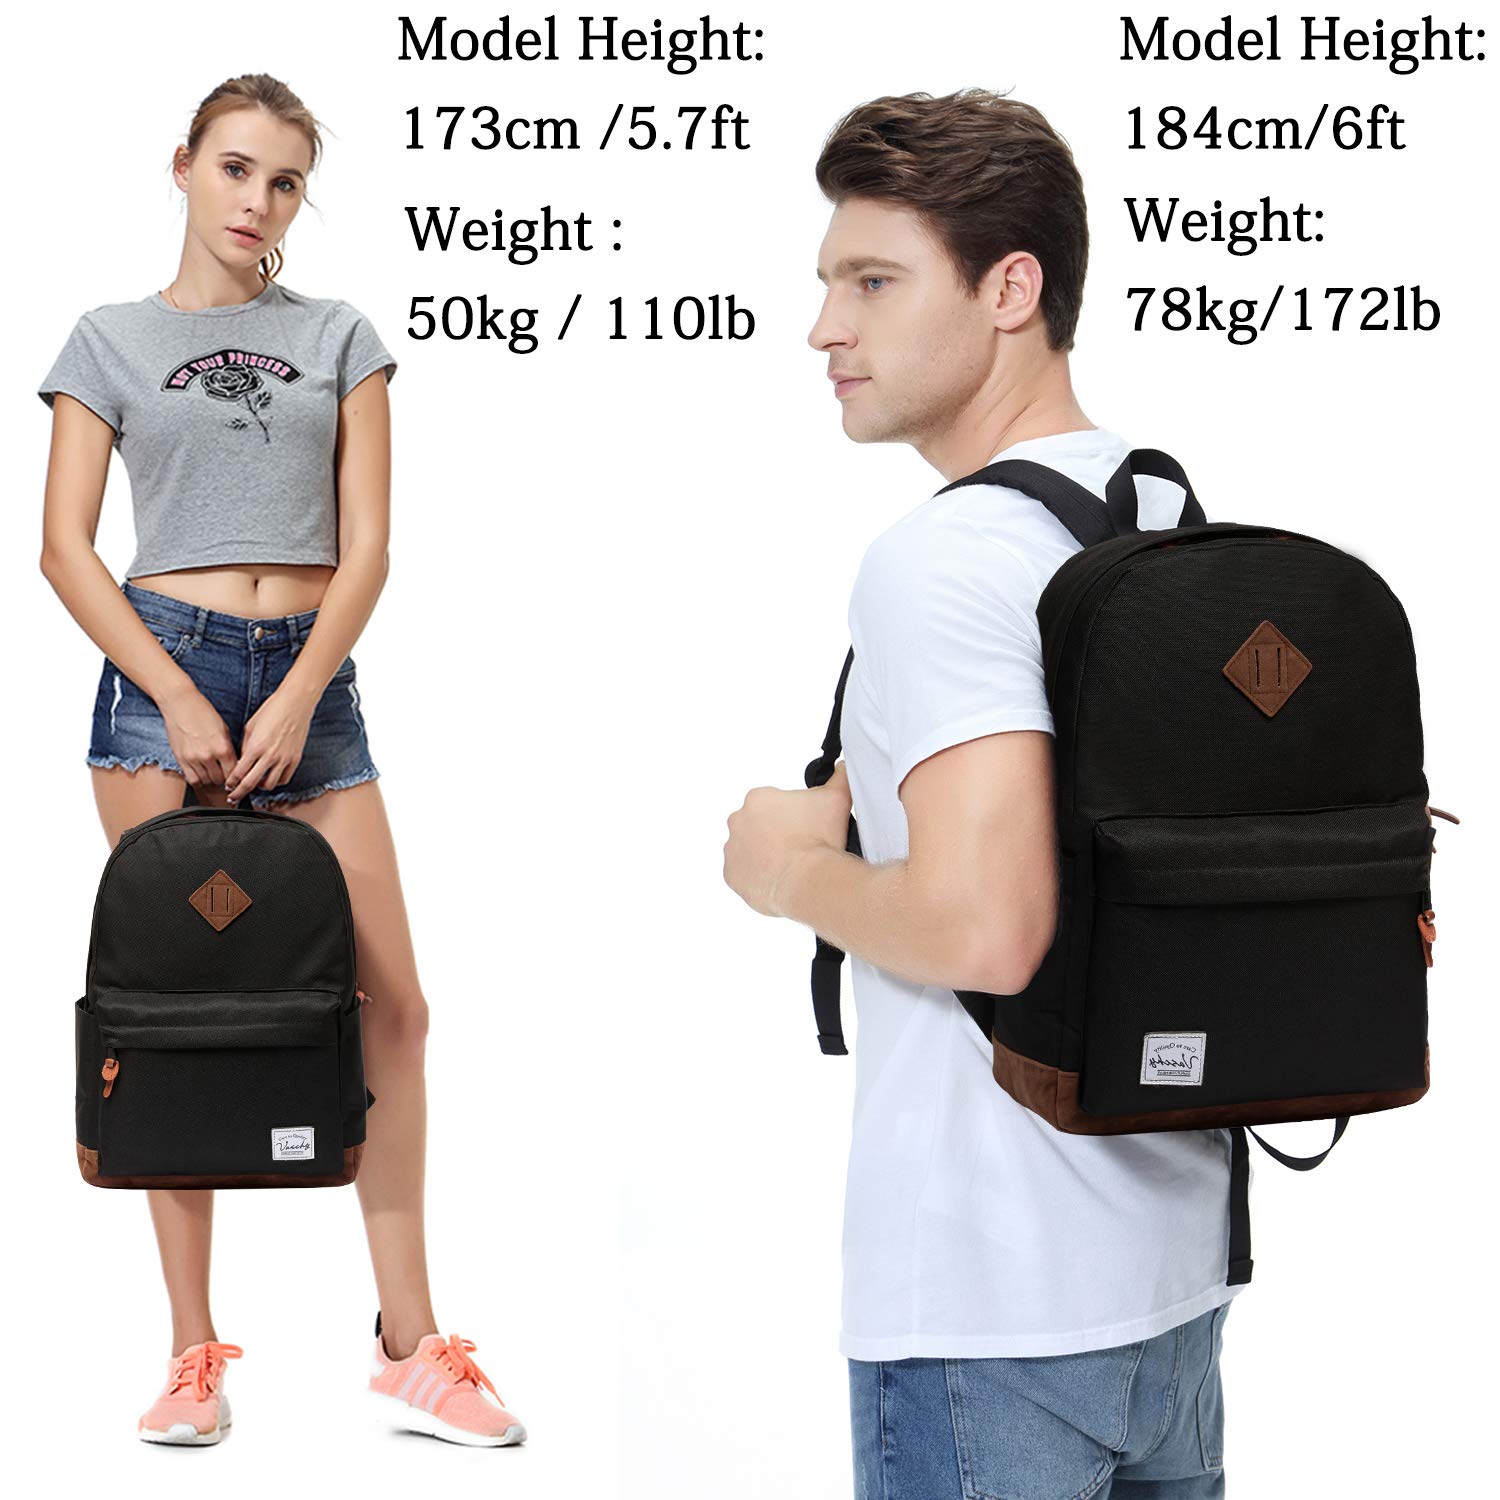 VASCHY Backpack for Men Women, Classic Water-resistant Lightweight Travel School Backpack Casual Daypack